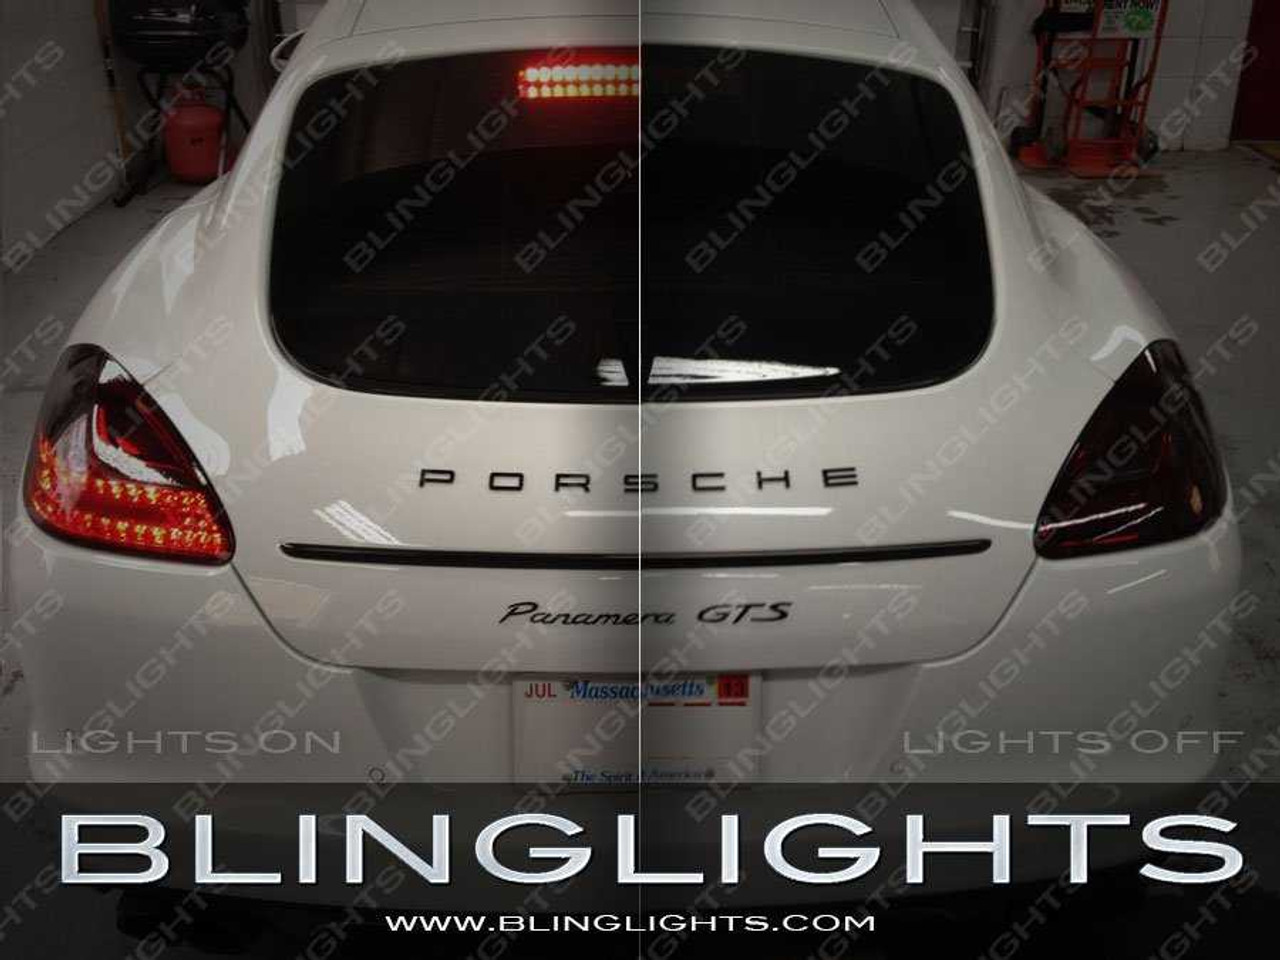 BlingLights Brand Tinted Taillamp Protective Film for 1997-2003 Infiniti QX4